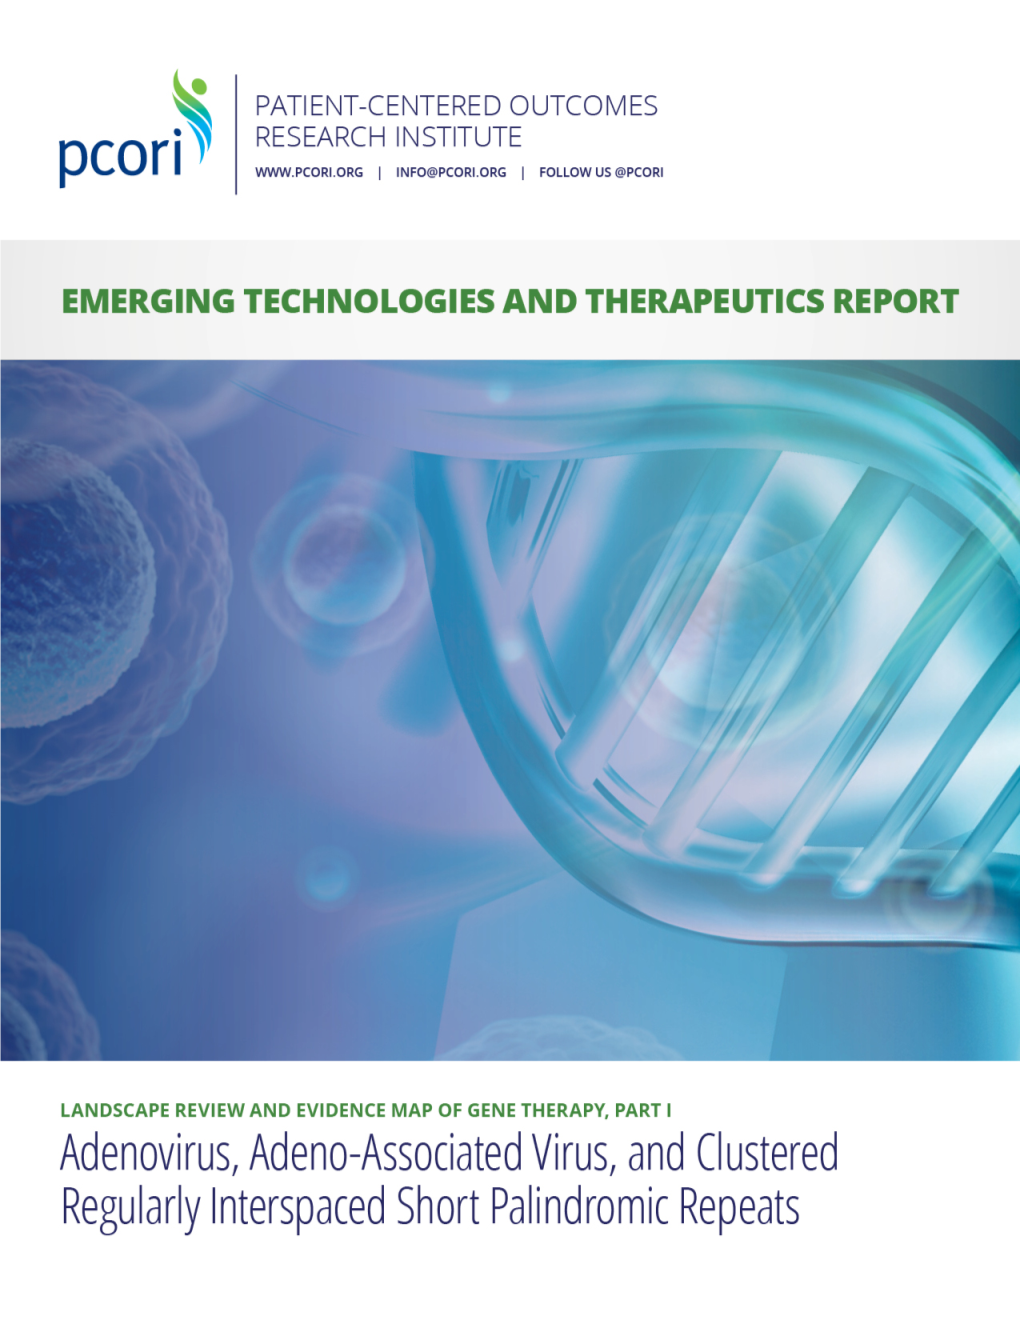 Emerging Technologies and Therapeutics Reports